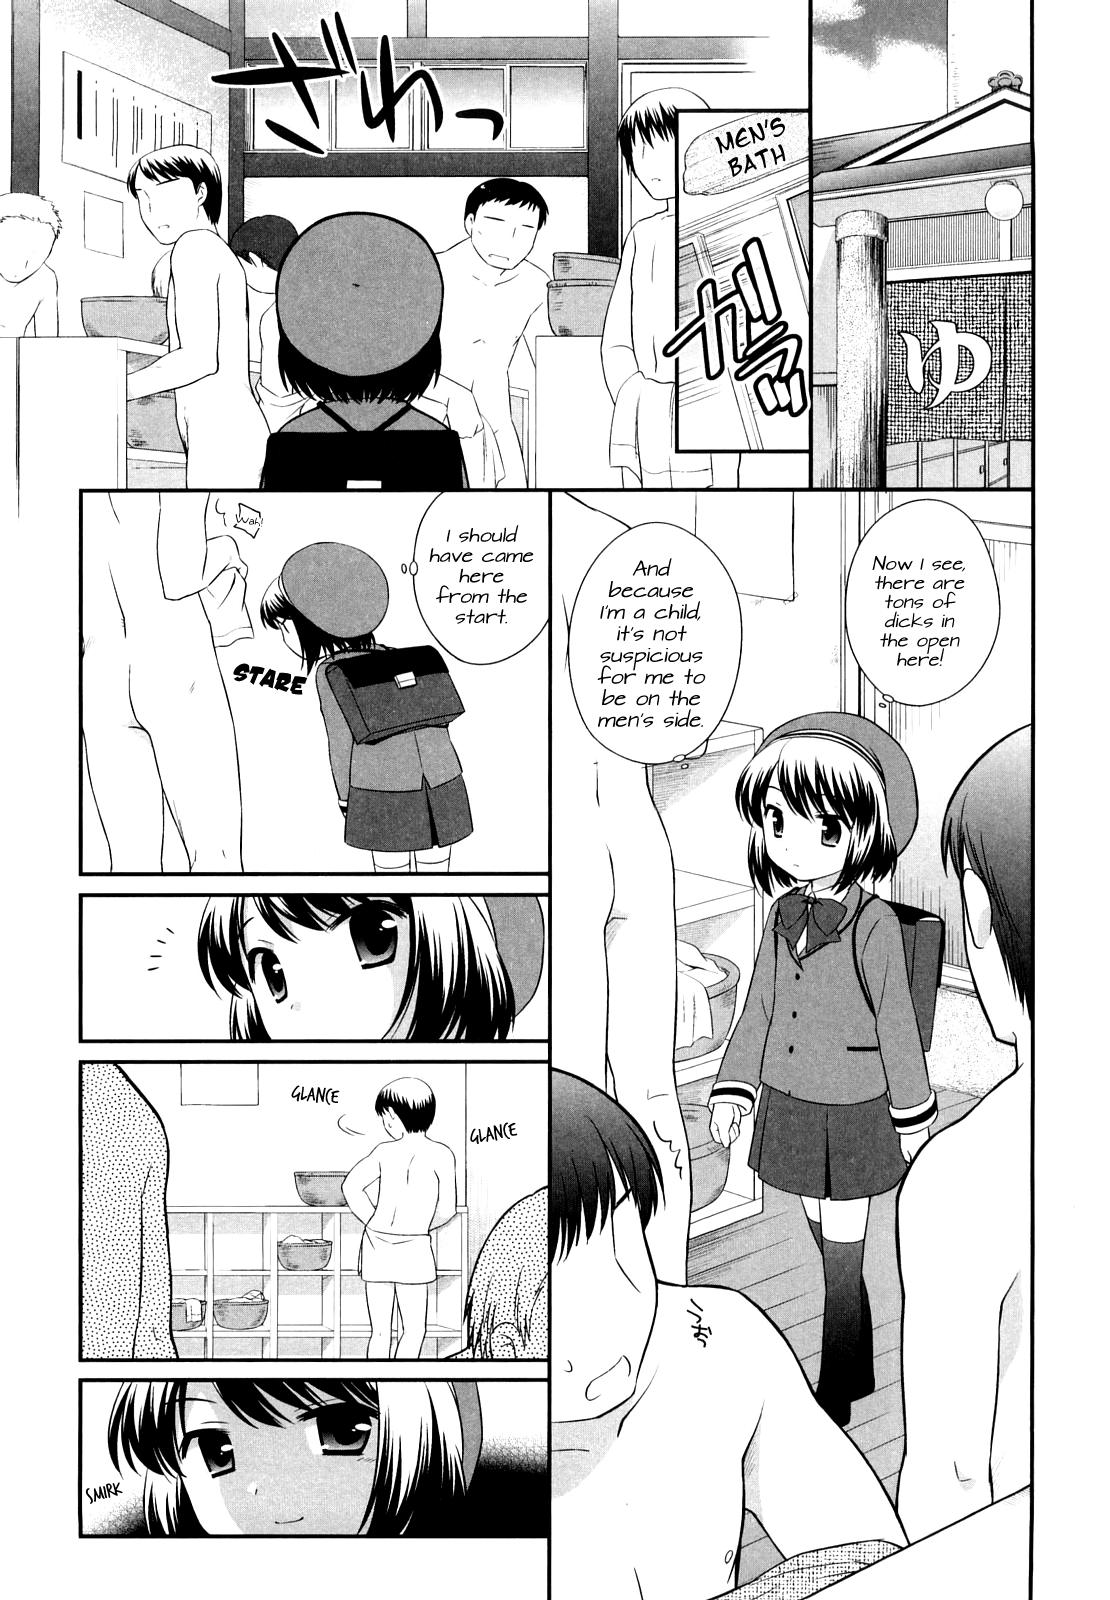 Old Vs Young Chinko Mitsuketa | A Newfound Dick + Afterword Gemendo - Page 3